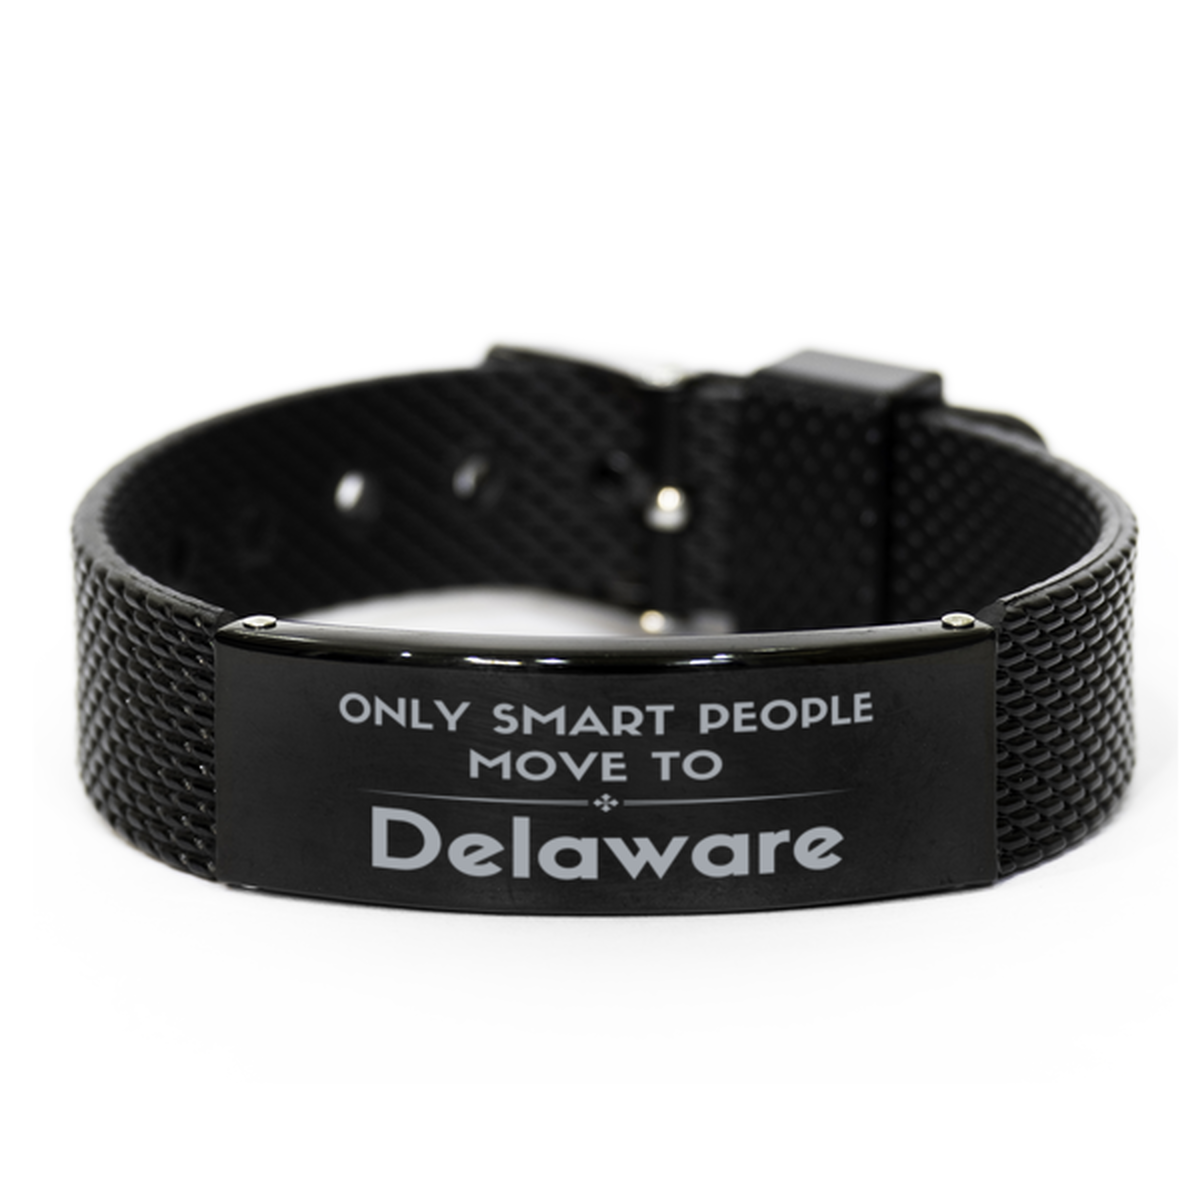 Only smart people move to Delaware Black Shark Mesh Bracelet, Gag Gifts For Delaware, Move to Delaware Gifts for Friends Coworker Funny Saying Quote